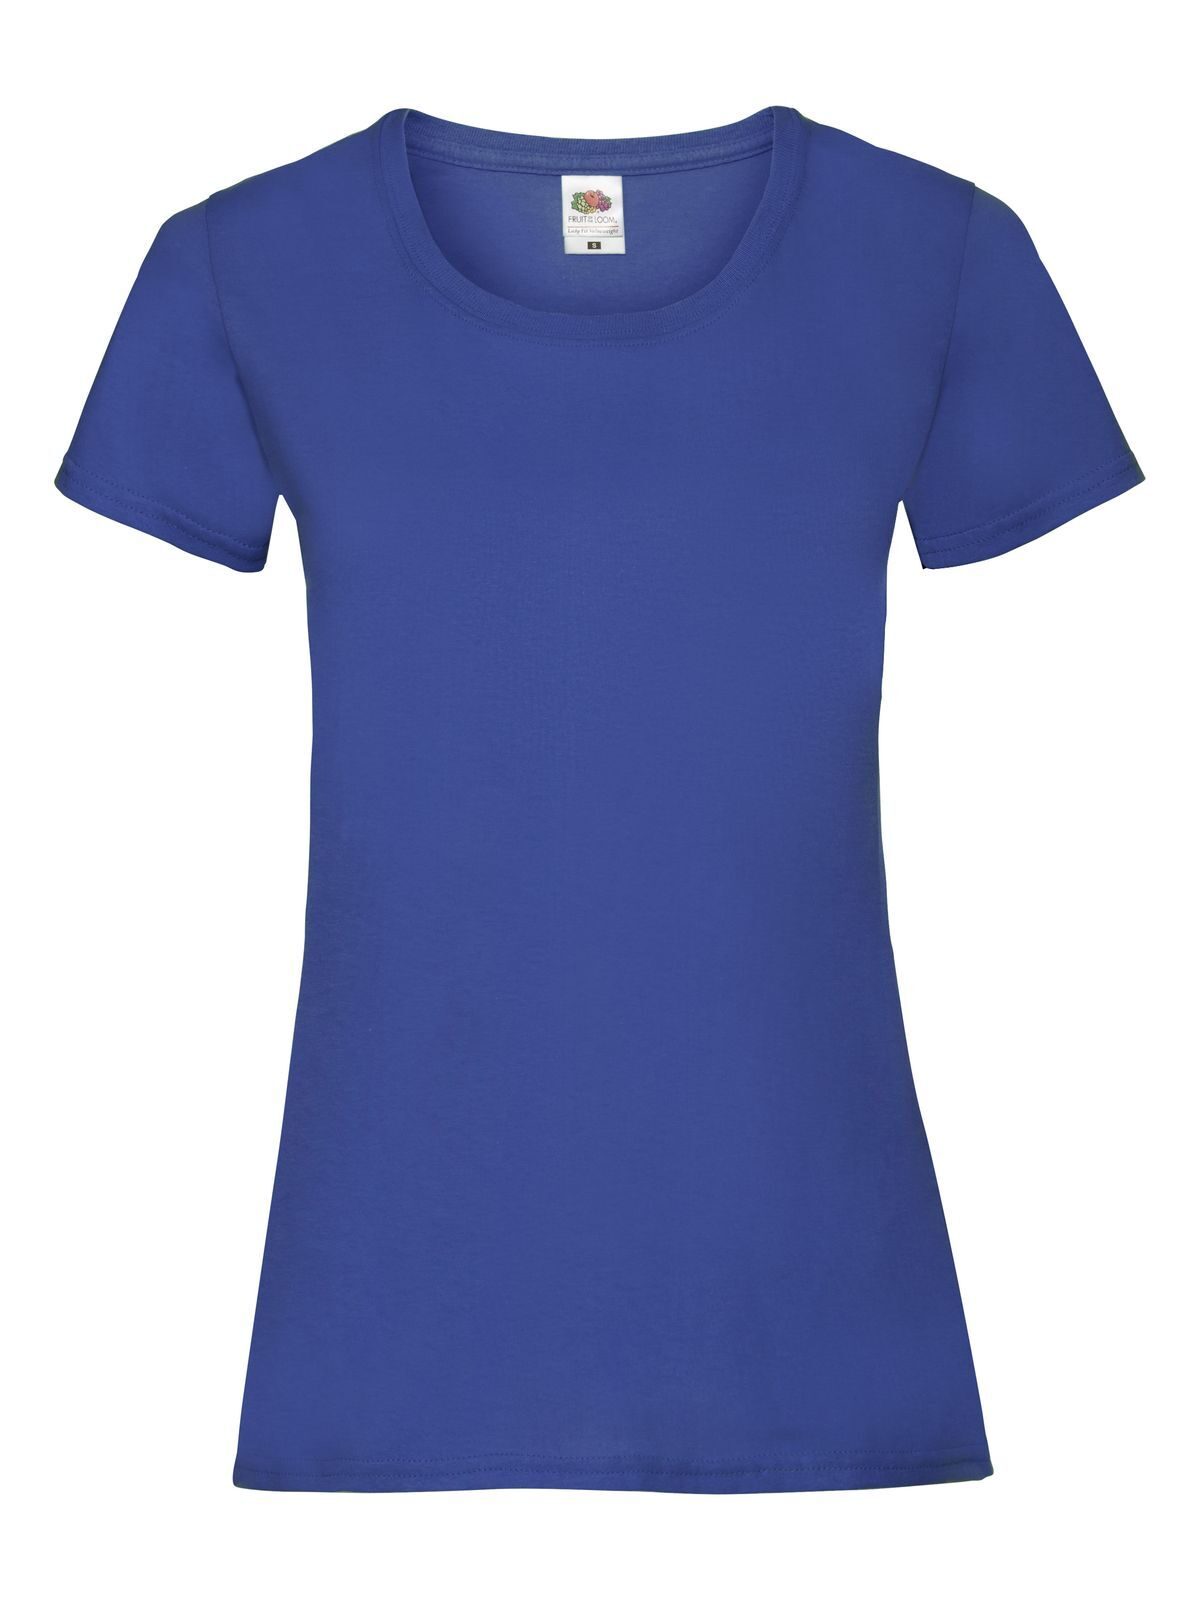 Ladies Valueweight T - FR613720 royal blue